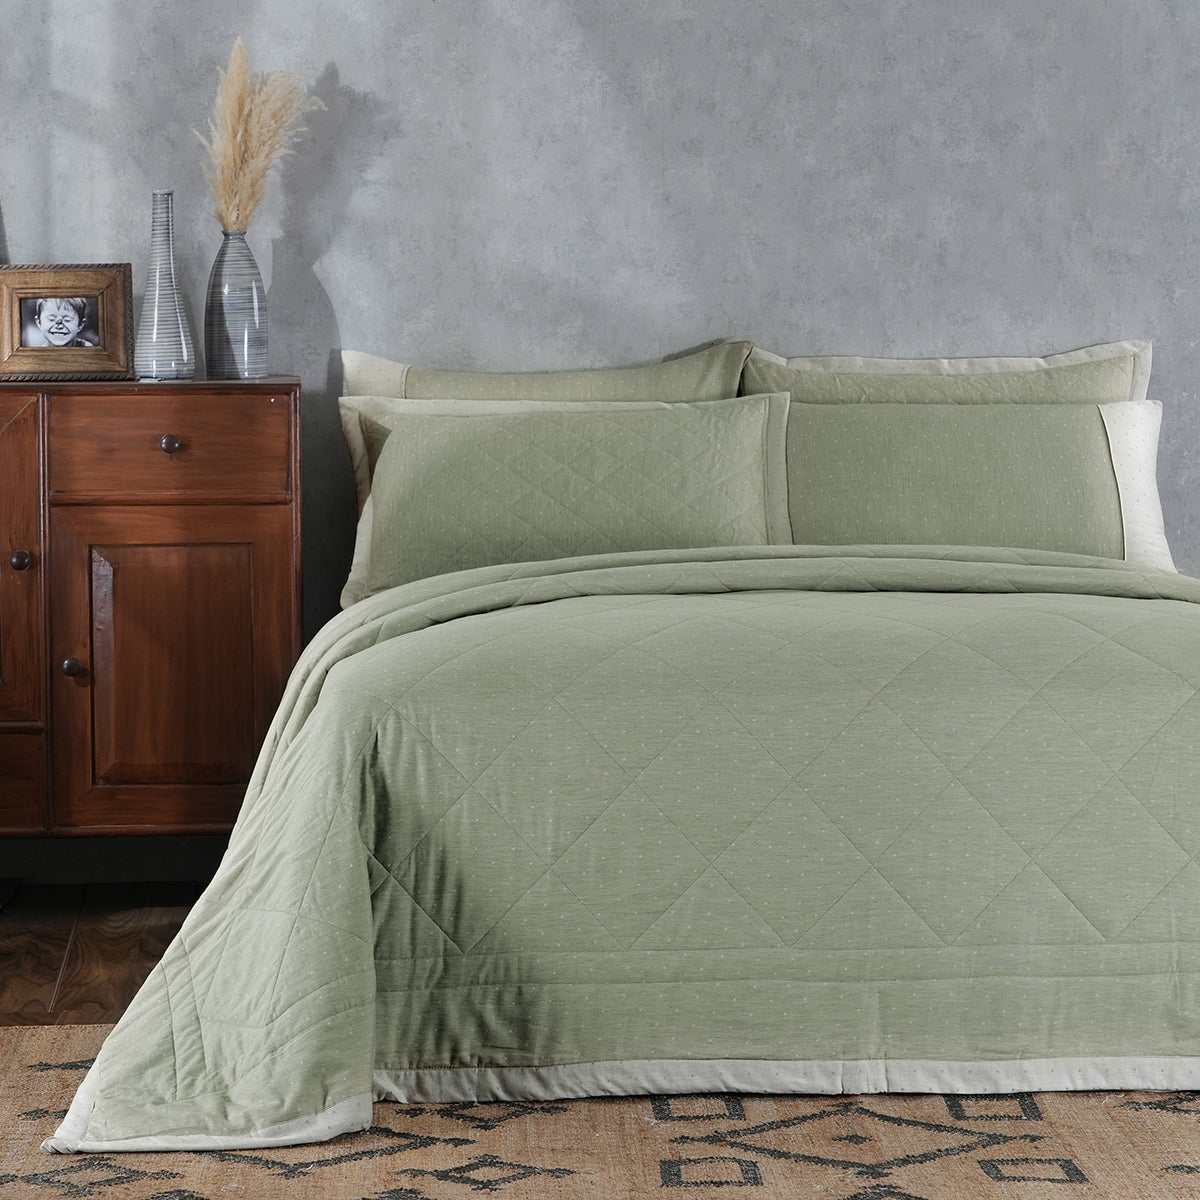 Muted Dot 100% Natural Cotton Filling Summer AC Quilt/Quilted Bed Cover/Comforter Green